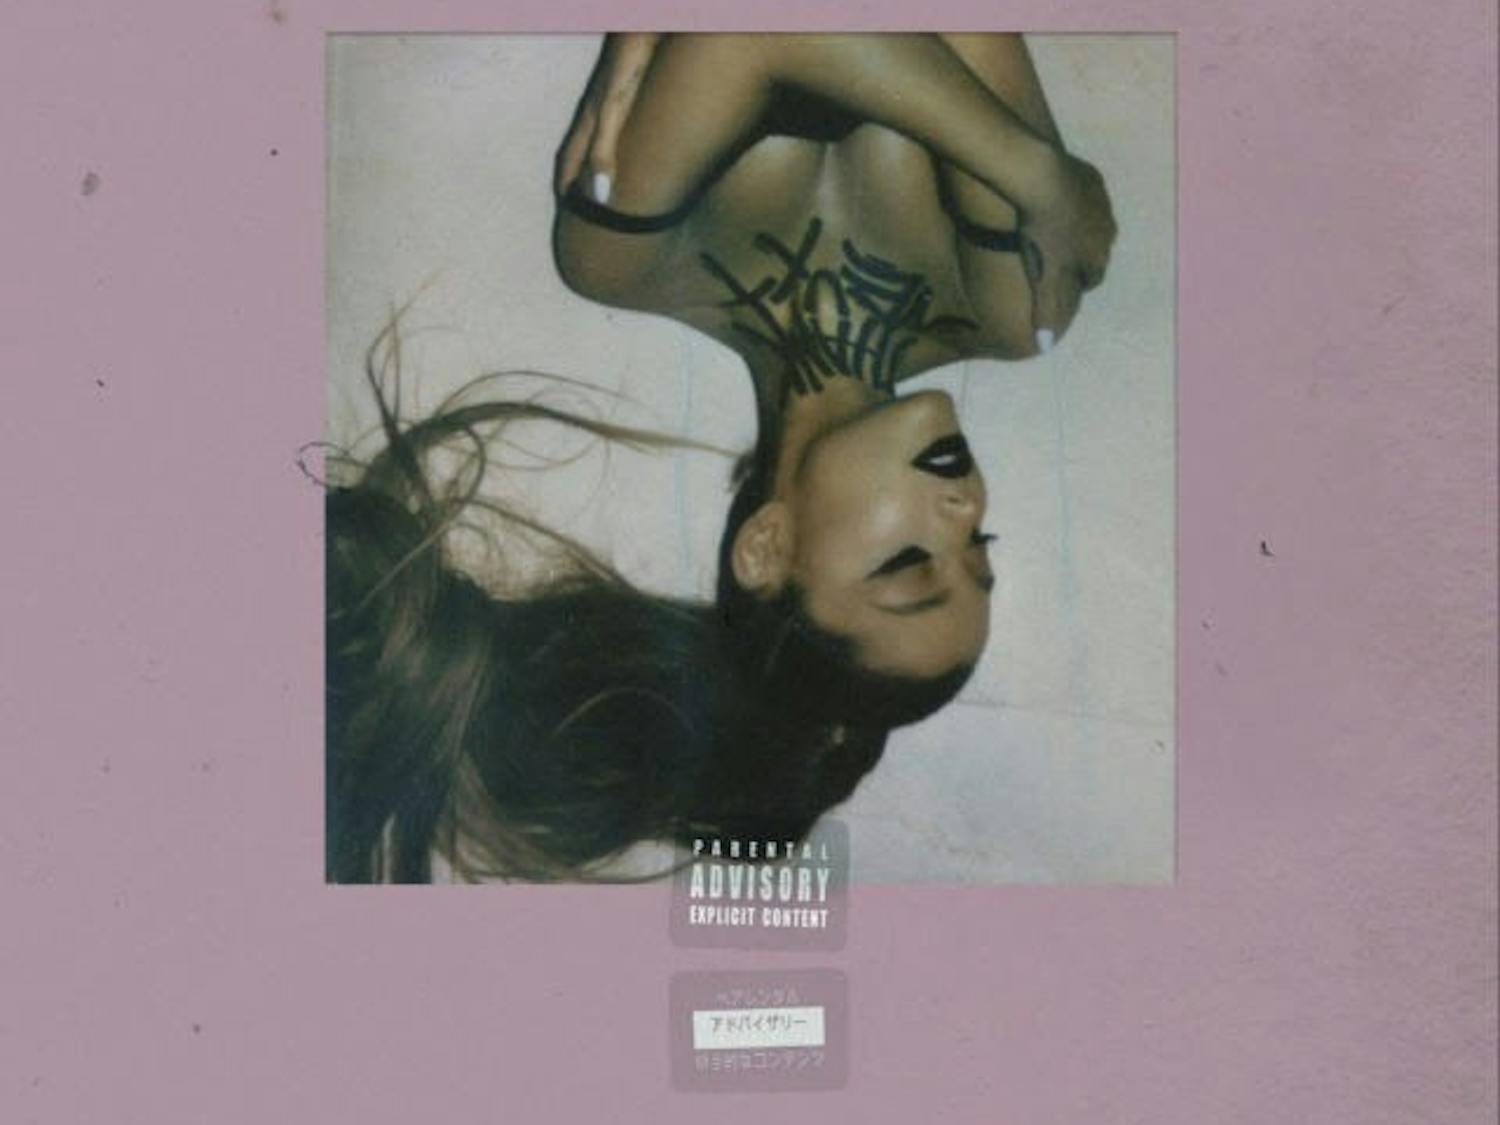 Ariana Grande’s fifth studio album, “Thank U, Next,” came out last week after the success of the record’s two No. 1 singles.